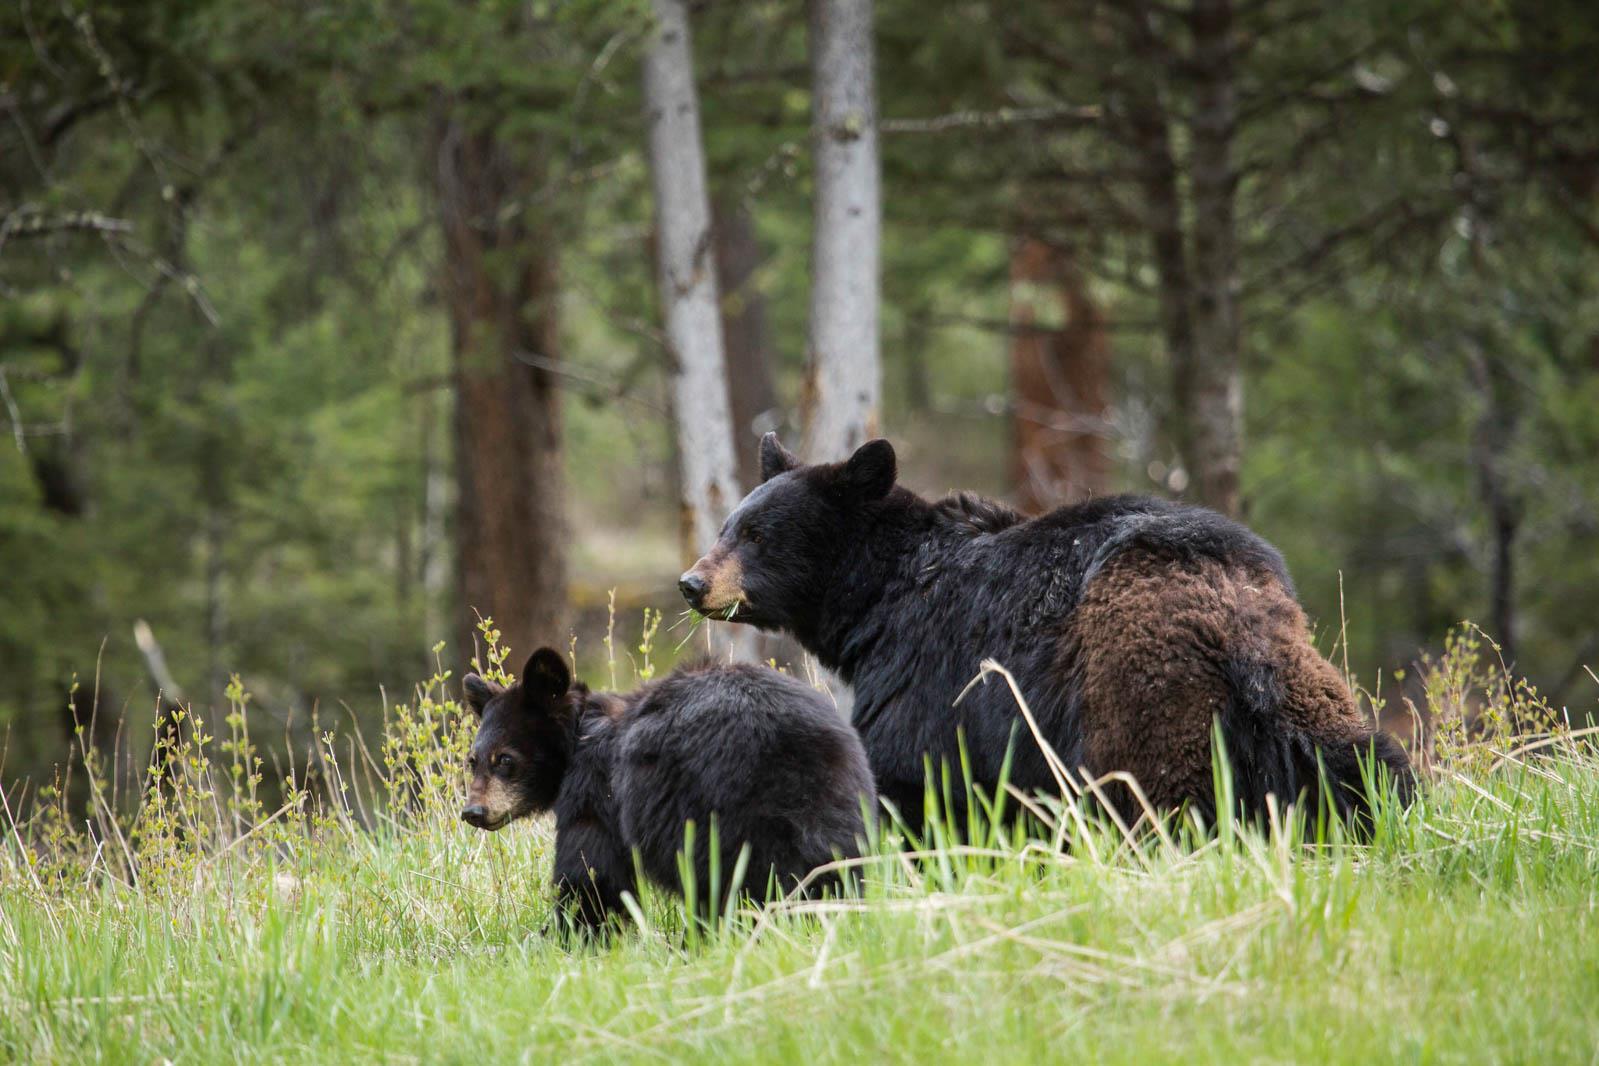 Bears in a national park, showing one of our nature photography tips.